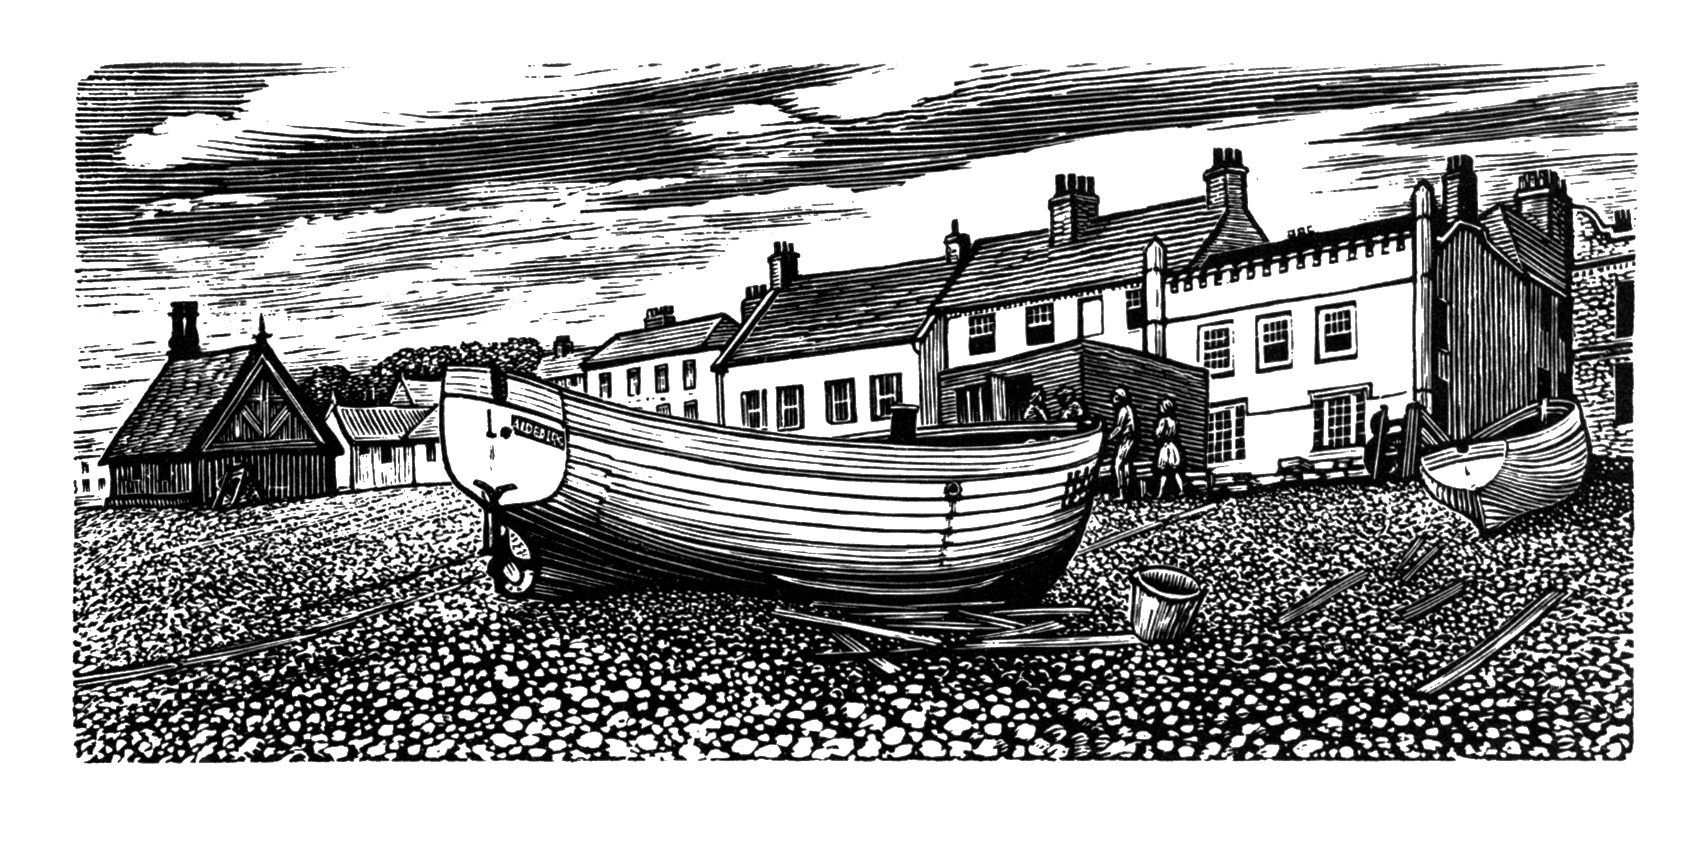 Wood engraving of wooden boat on a rocky beach